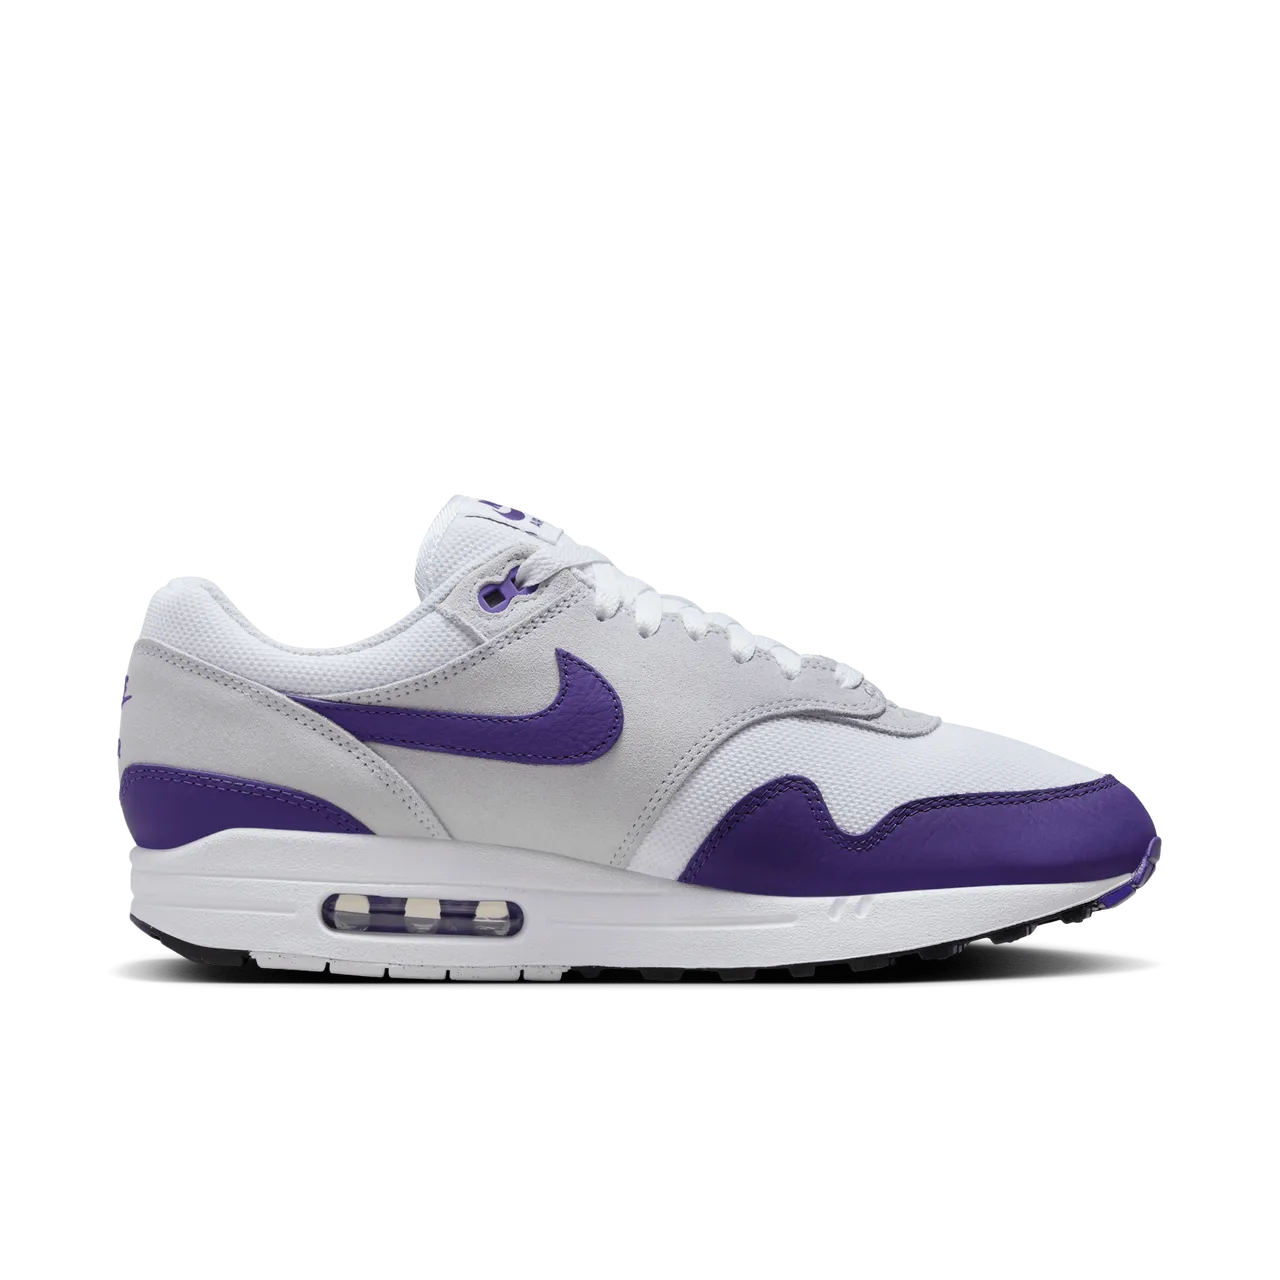 Nike Air Max 1 SC Men's Shoes - White - Leather